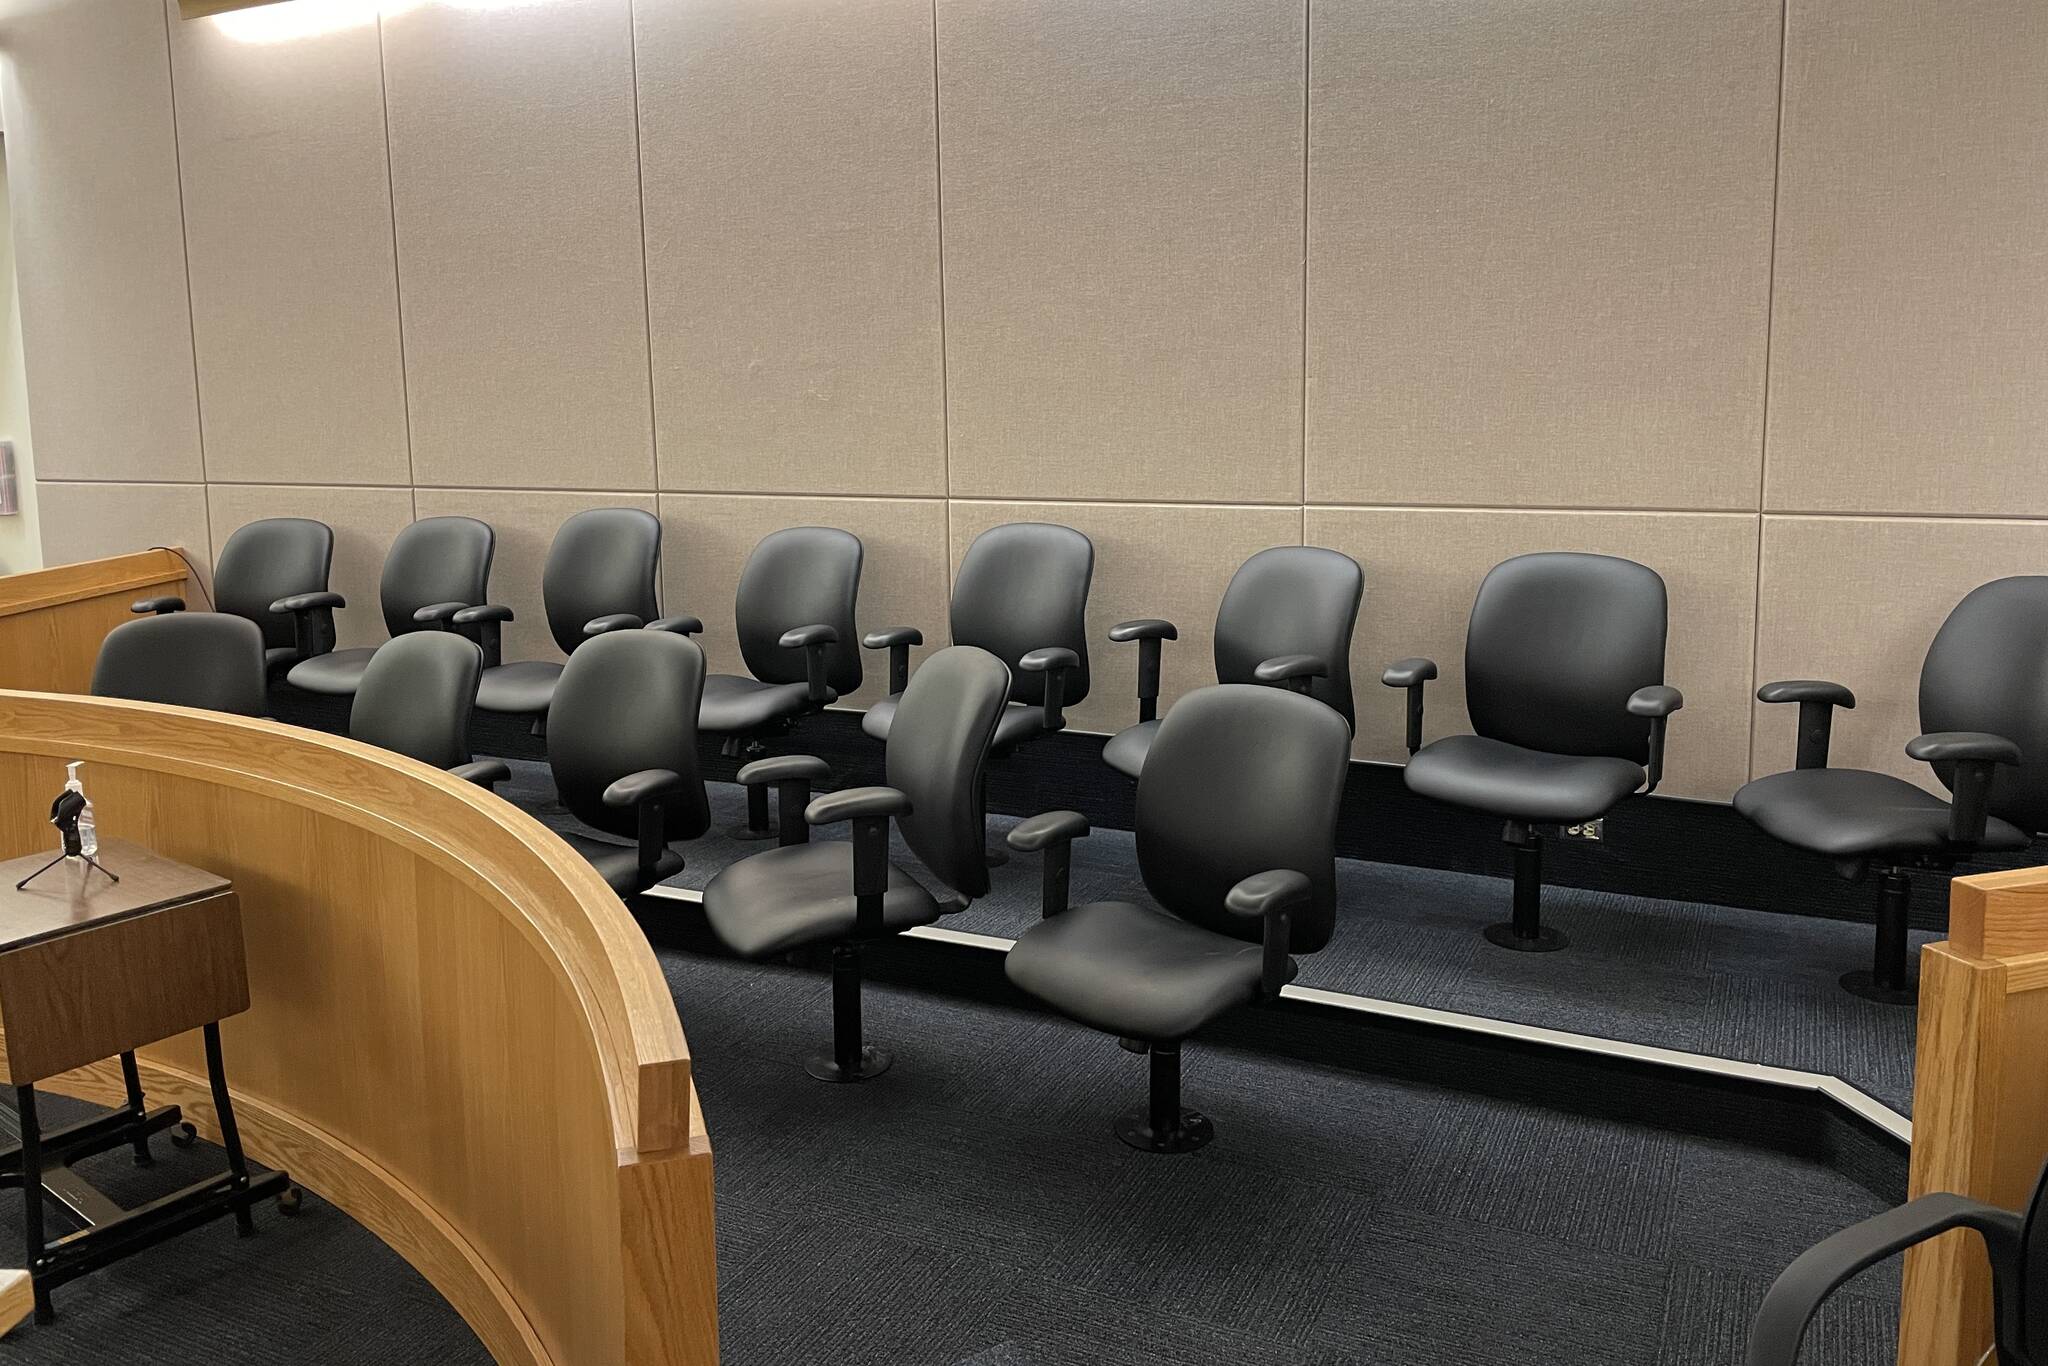 The jury section stands empty between rounds of the jury selection process in the trial for a man charged in a stabbing in downtown Juneau in 2019 on May 16, 2022. (Michael S. Lockett / Juneau Empire)